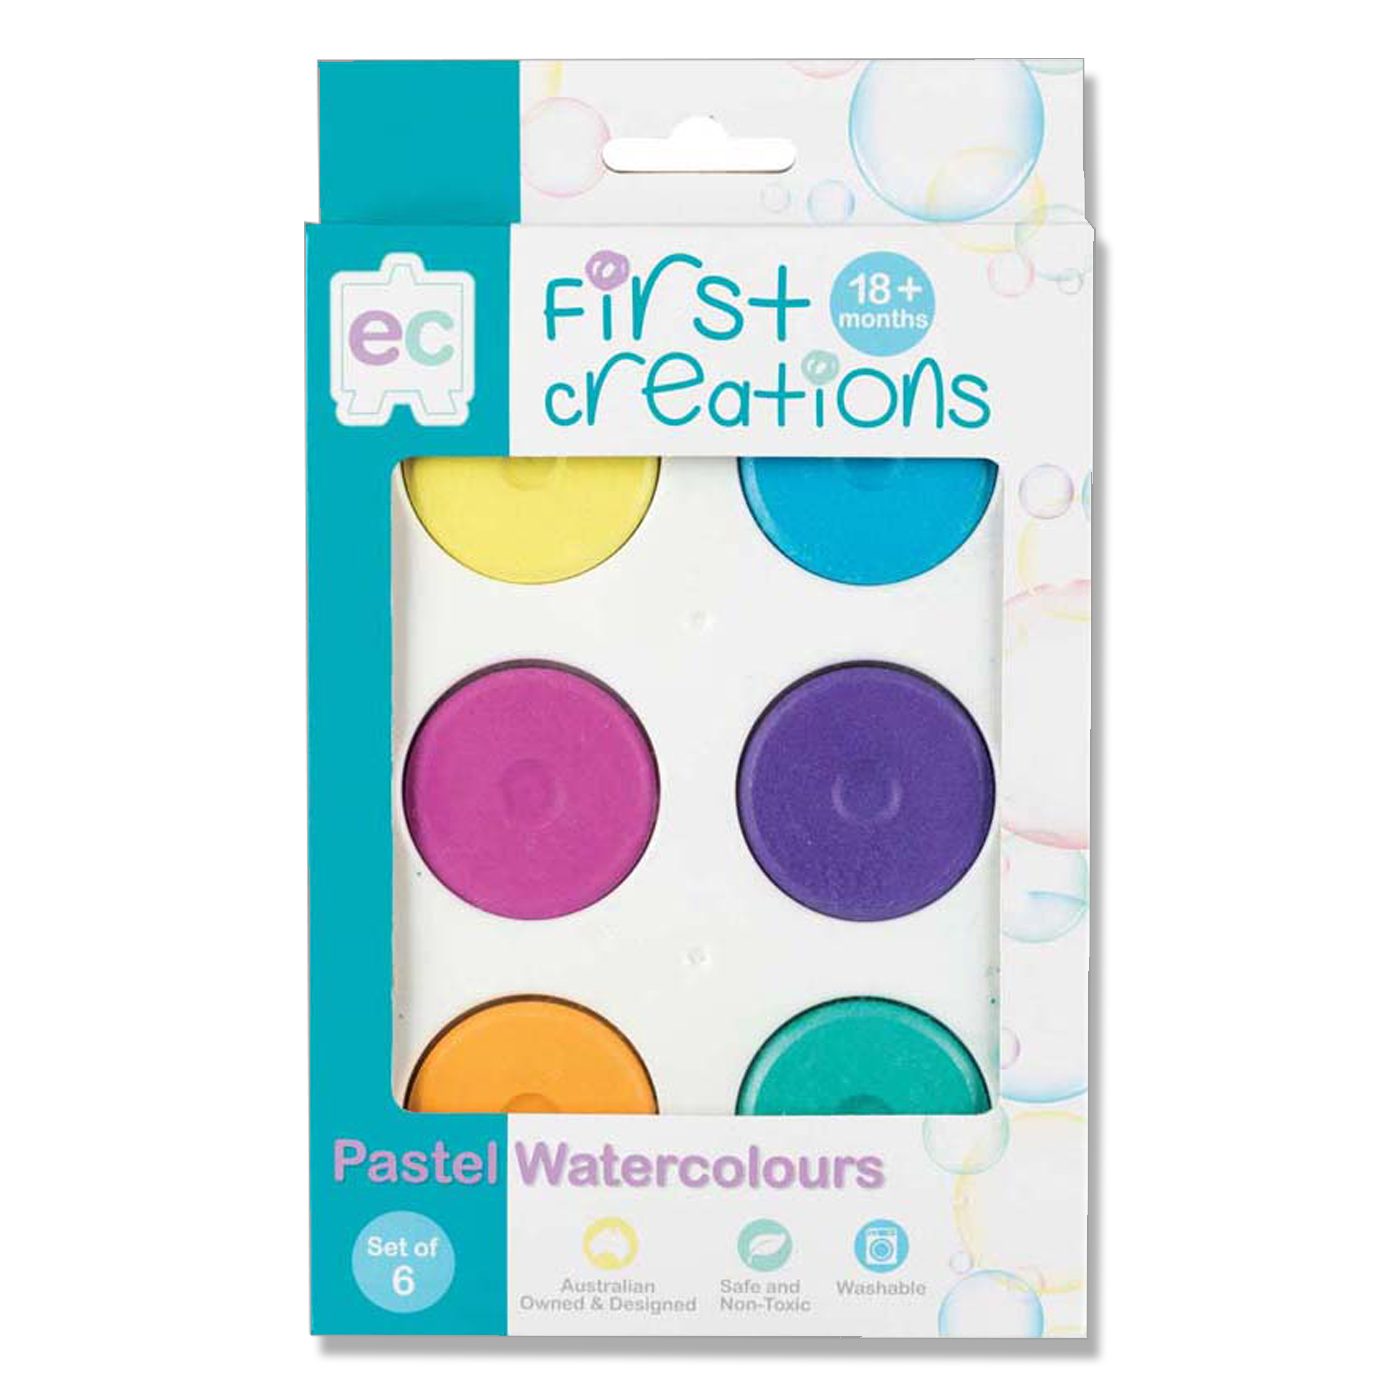 EC First Creations Pastel Watercolours Set of 6 Disc